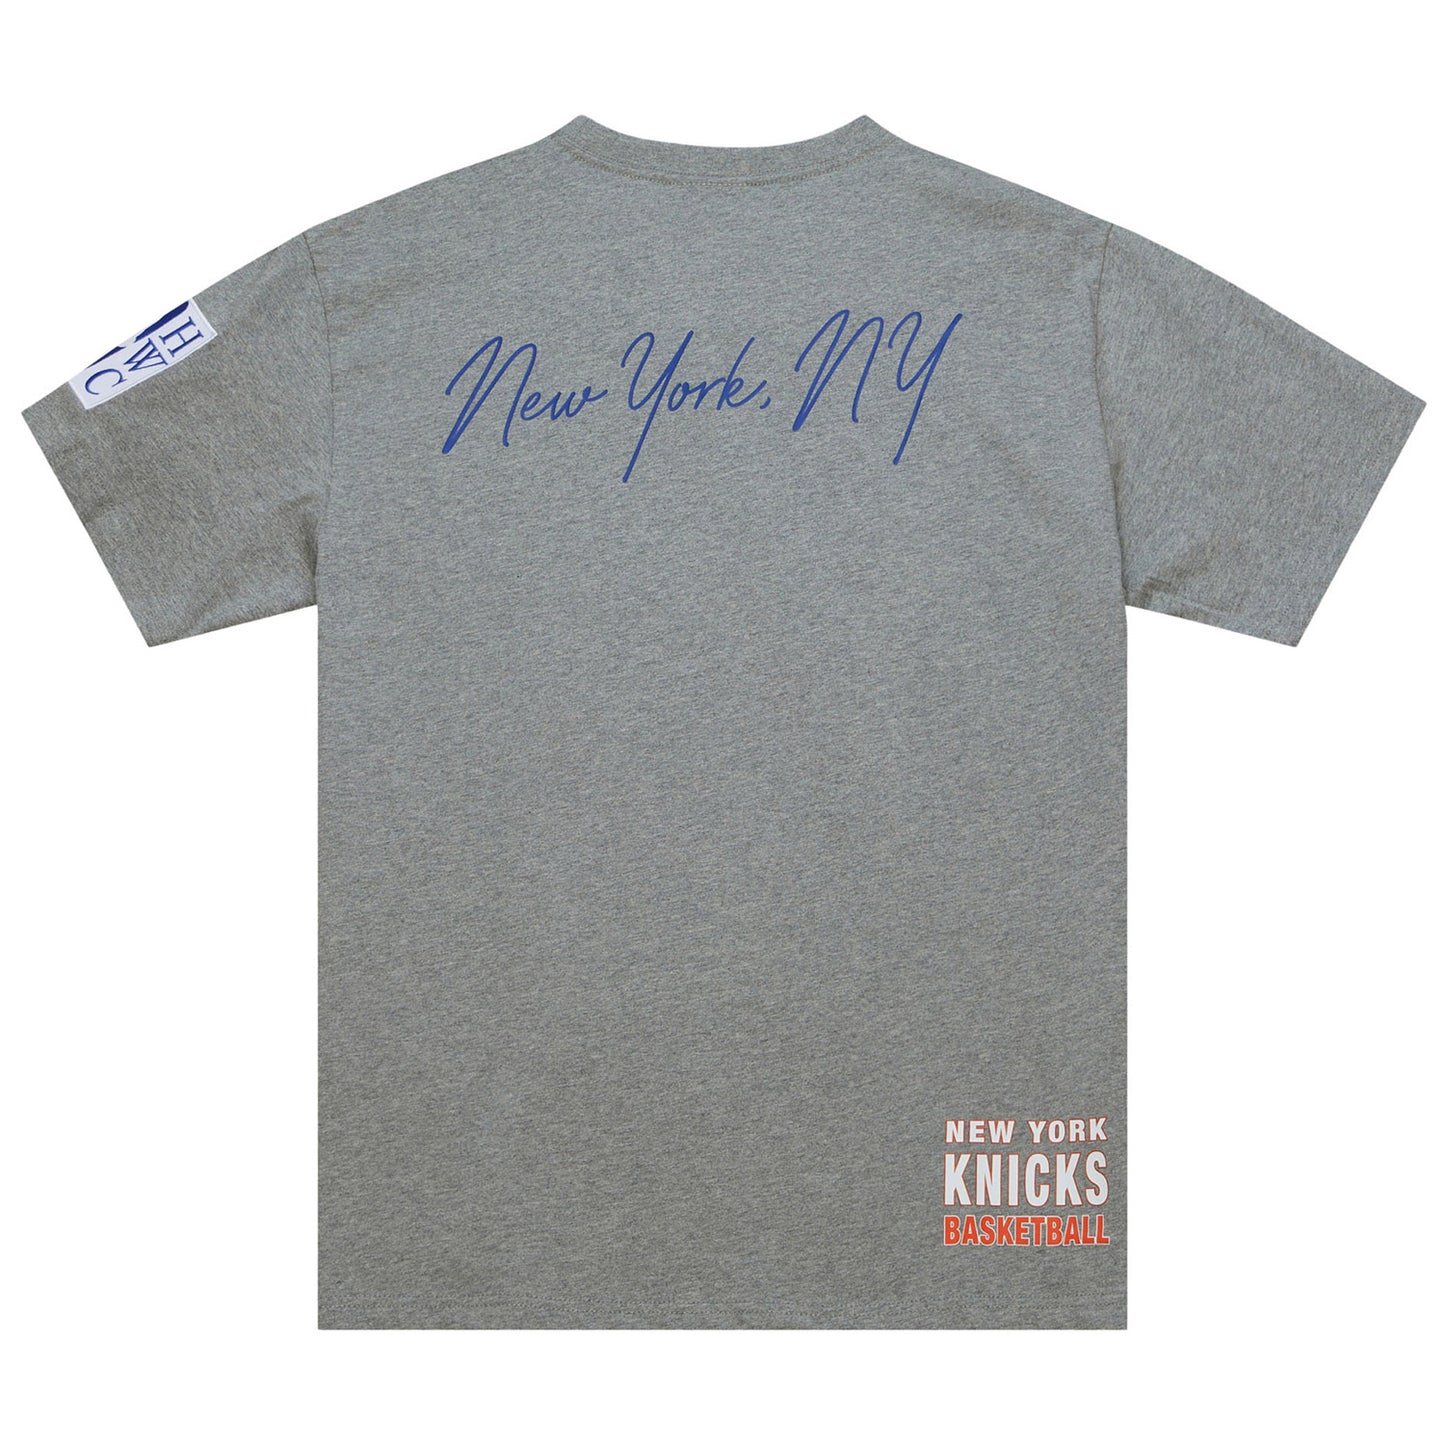 New York Knicks Tap New York or Nowhere for Apparel Collection